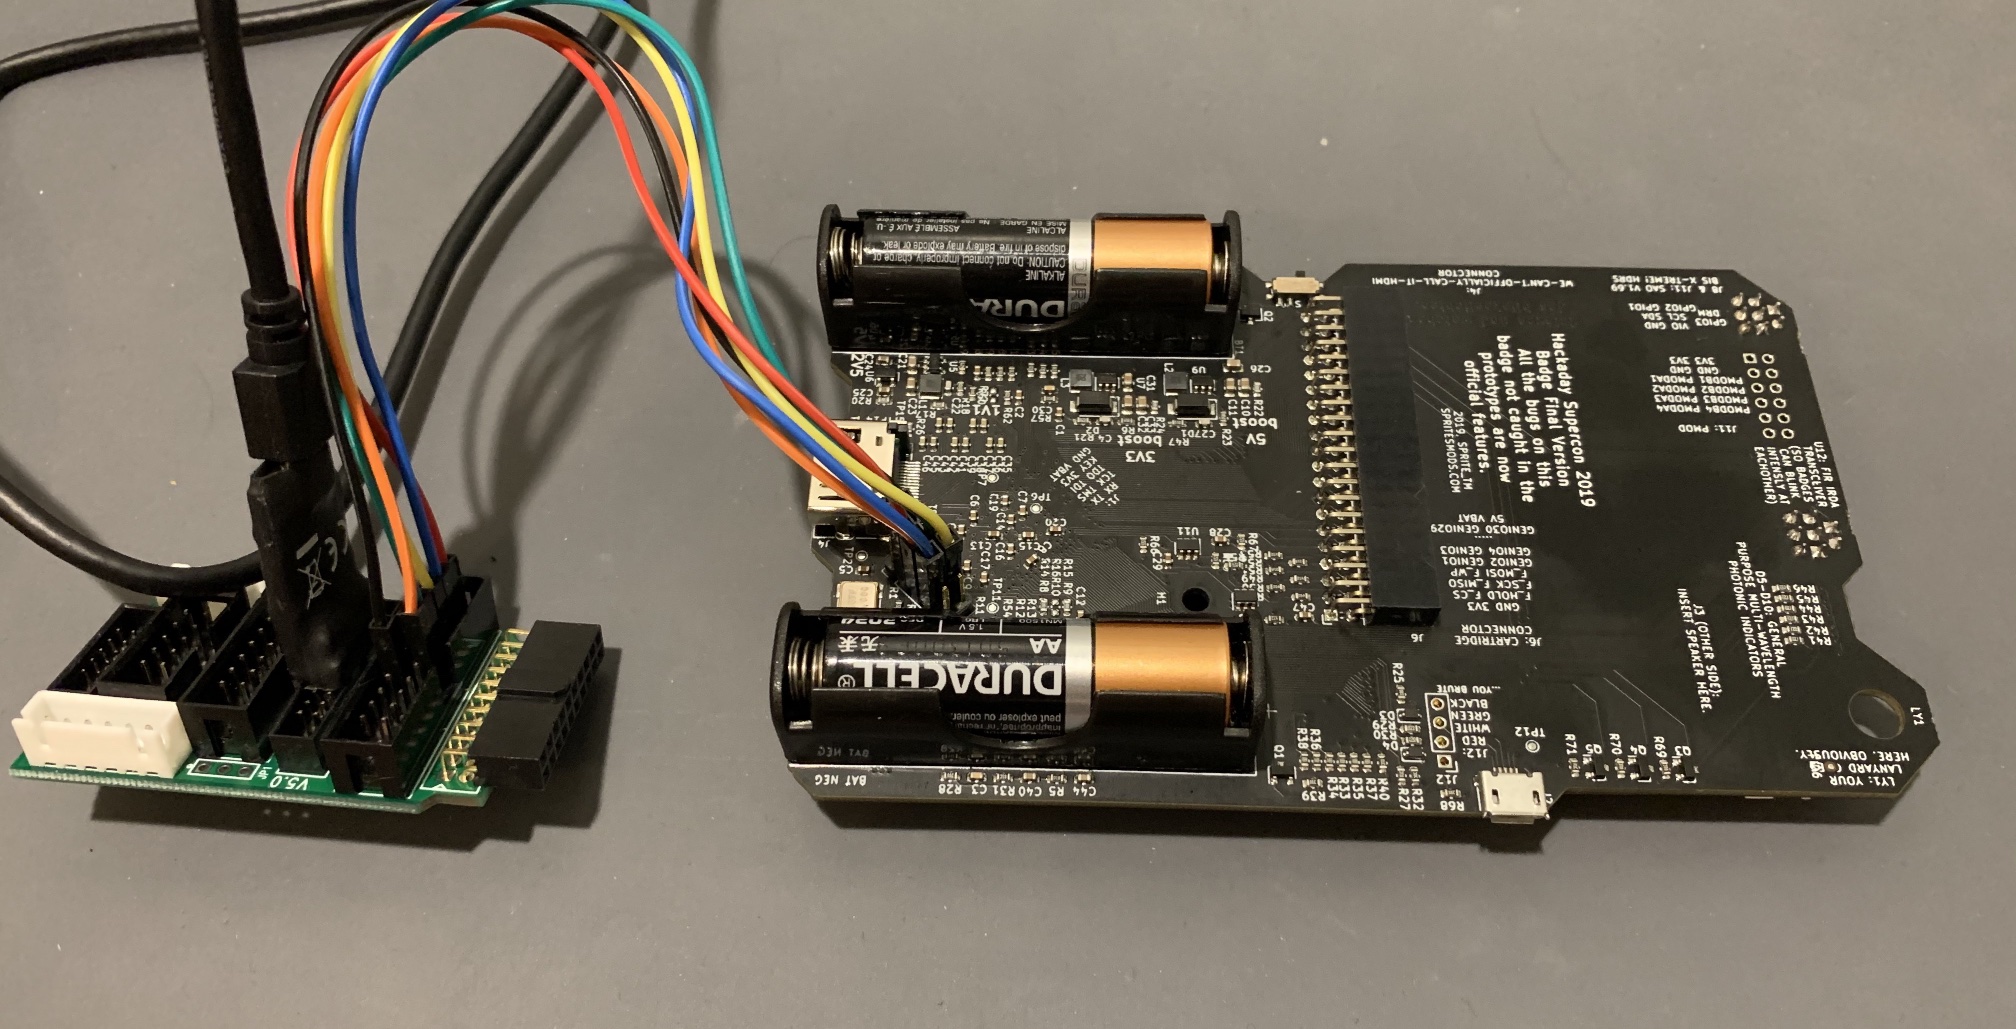 Digilent HS3 JTAG adapter connected to the Supercon badge